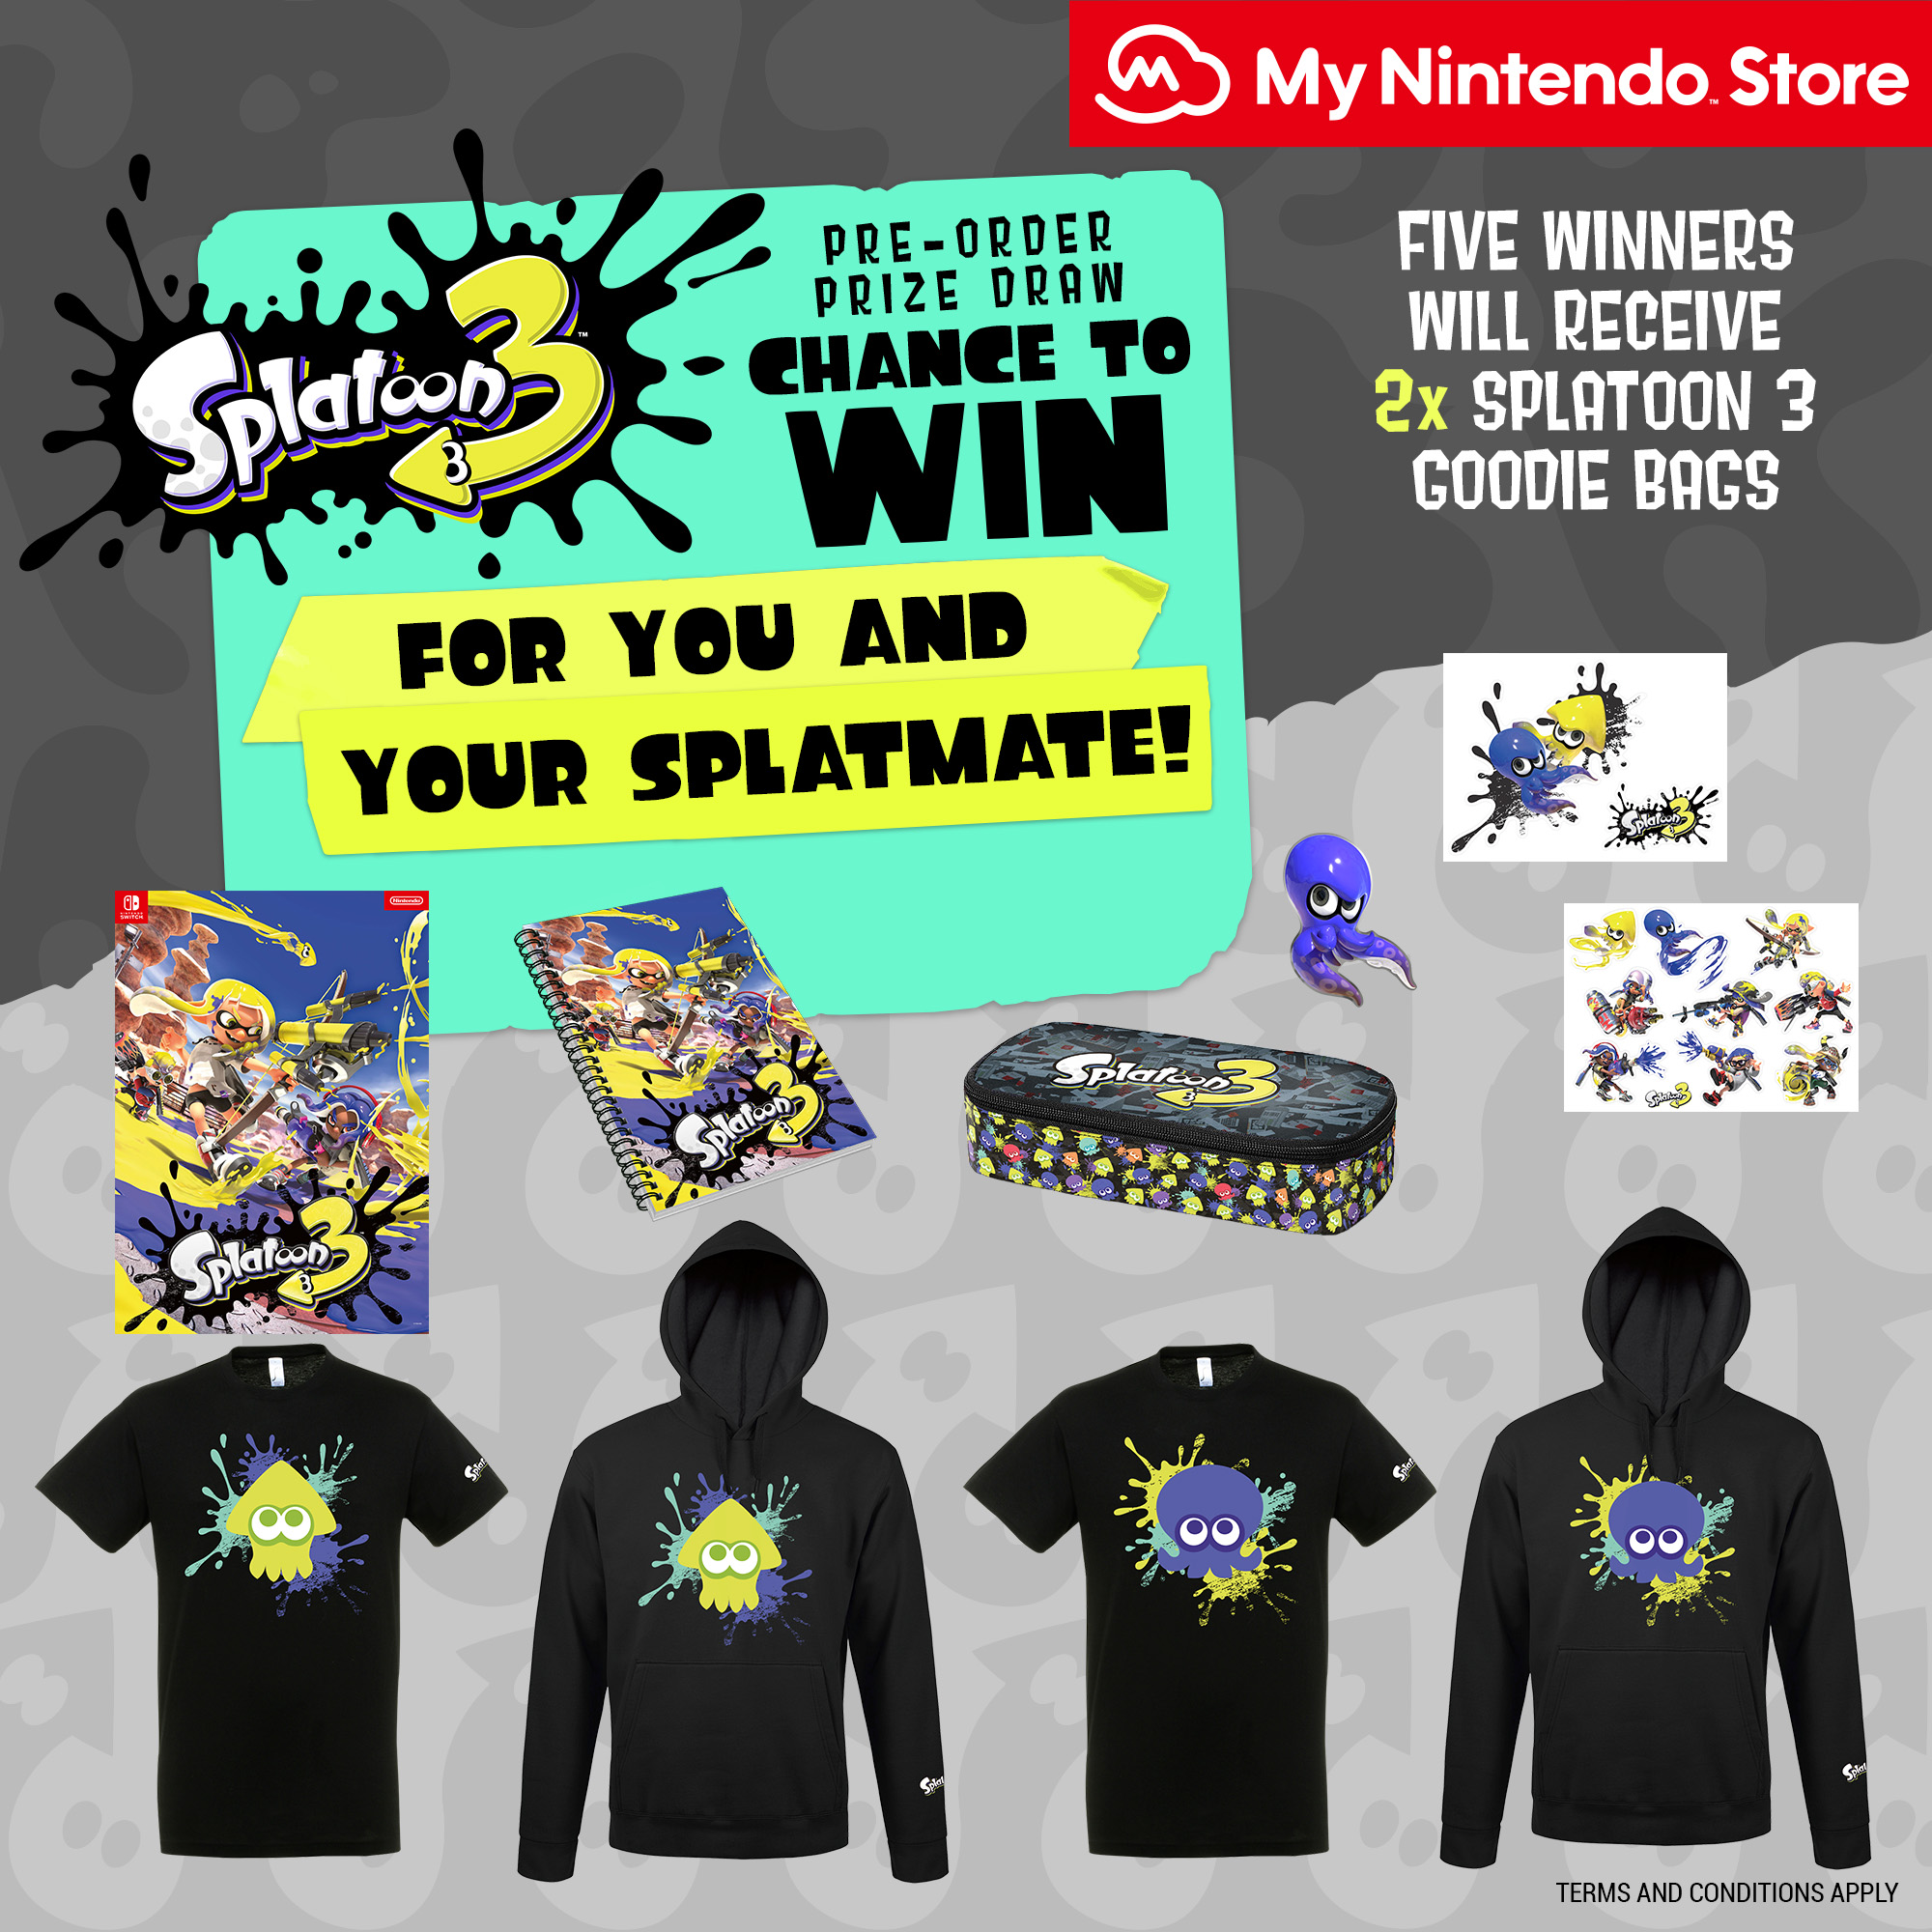 Pre-Order Splatoon 3 on My Nintendo Store for a chance to win two Splatoon 3 goodie bags!